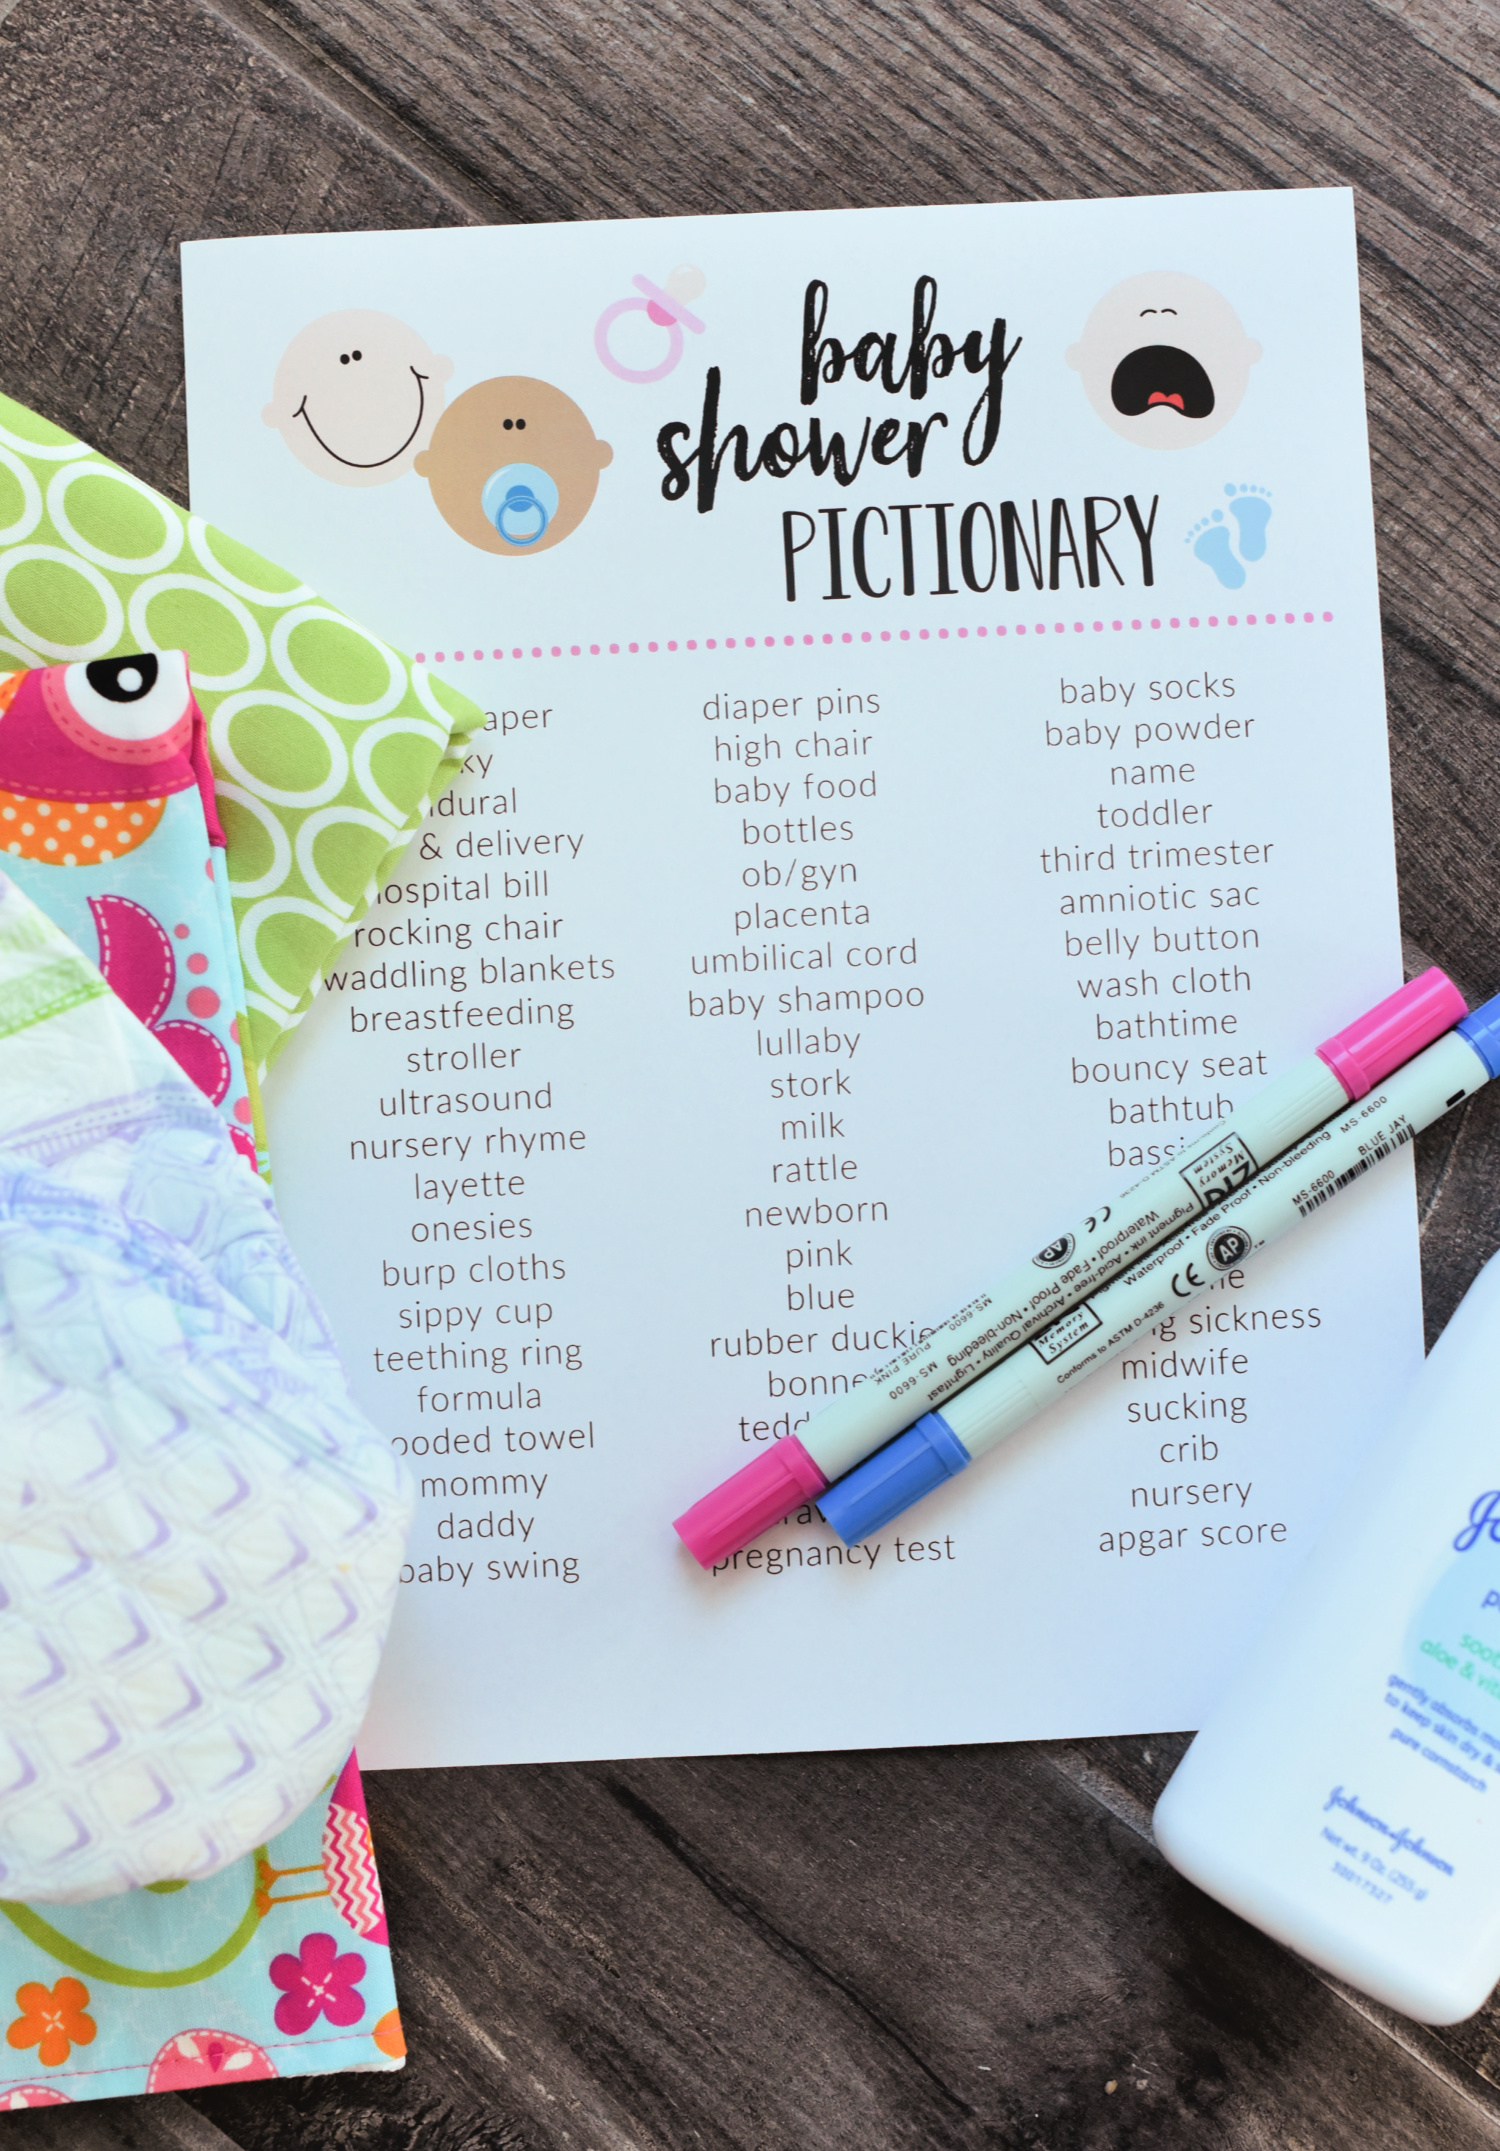 Baby Shower Pictionary Game-Fun to print and play for shower and this baby shower game is one that all of the guests will enjoy! #babyshower #babyshowergames #partygames